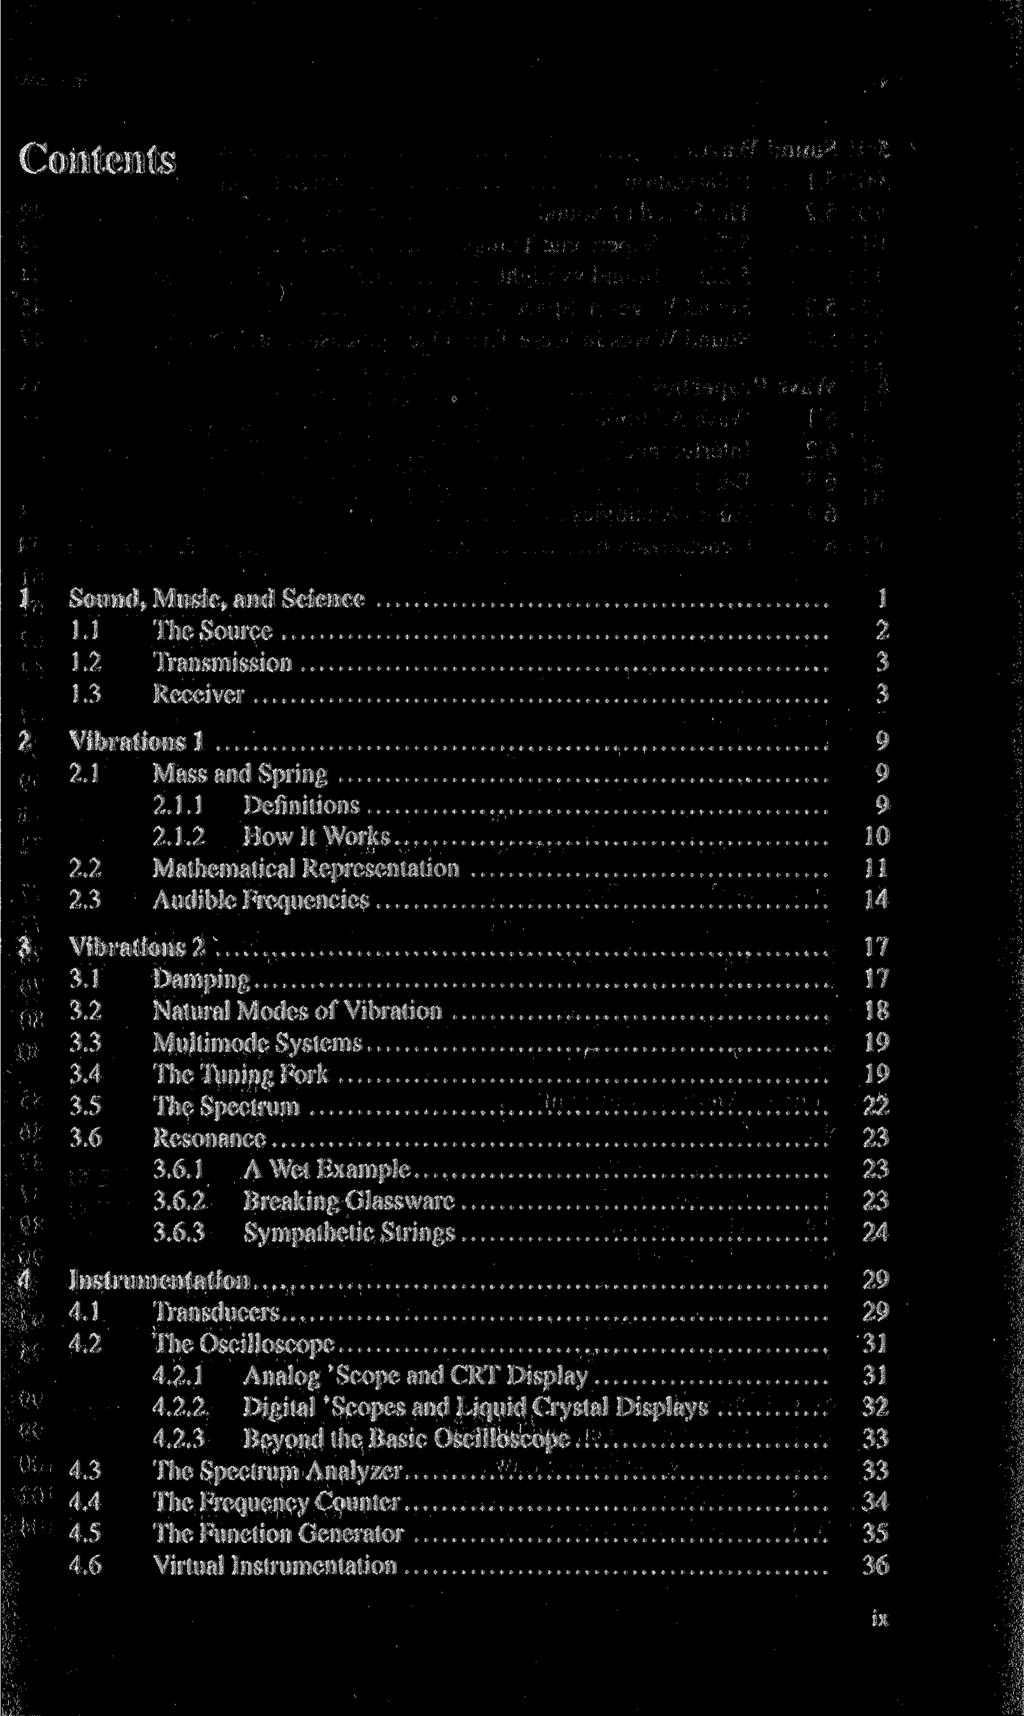 Contents 1 Sound, Music, and Science 1 1.1 The Source 2 1.2 Transmission 3 1.3 Receiver 3 2 Vibrations 1 9 2.1 Mass and Spring 9 2.1.1 Definitions 9 2.1.2 How It Works 10 2.